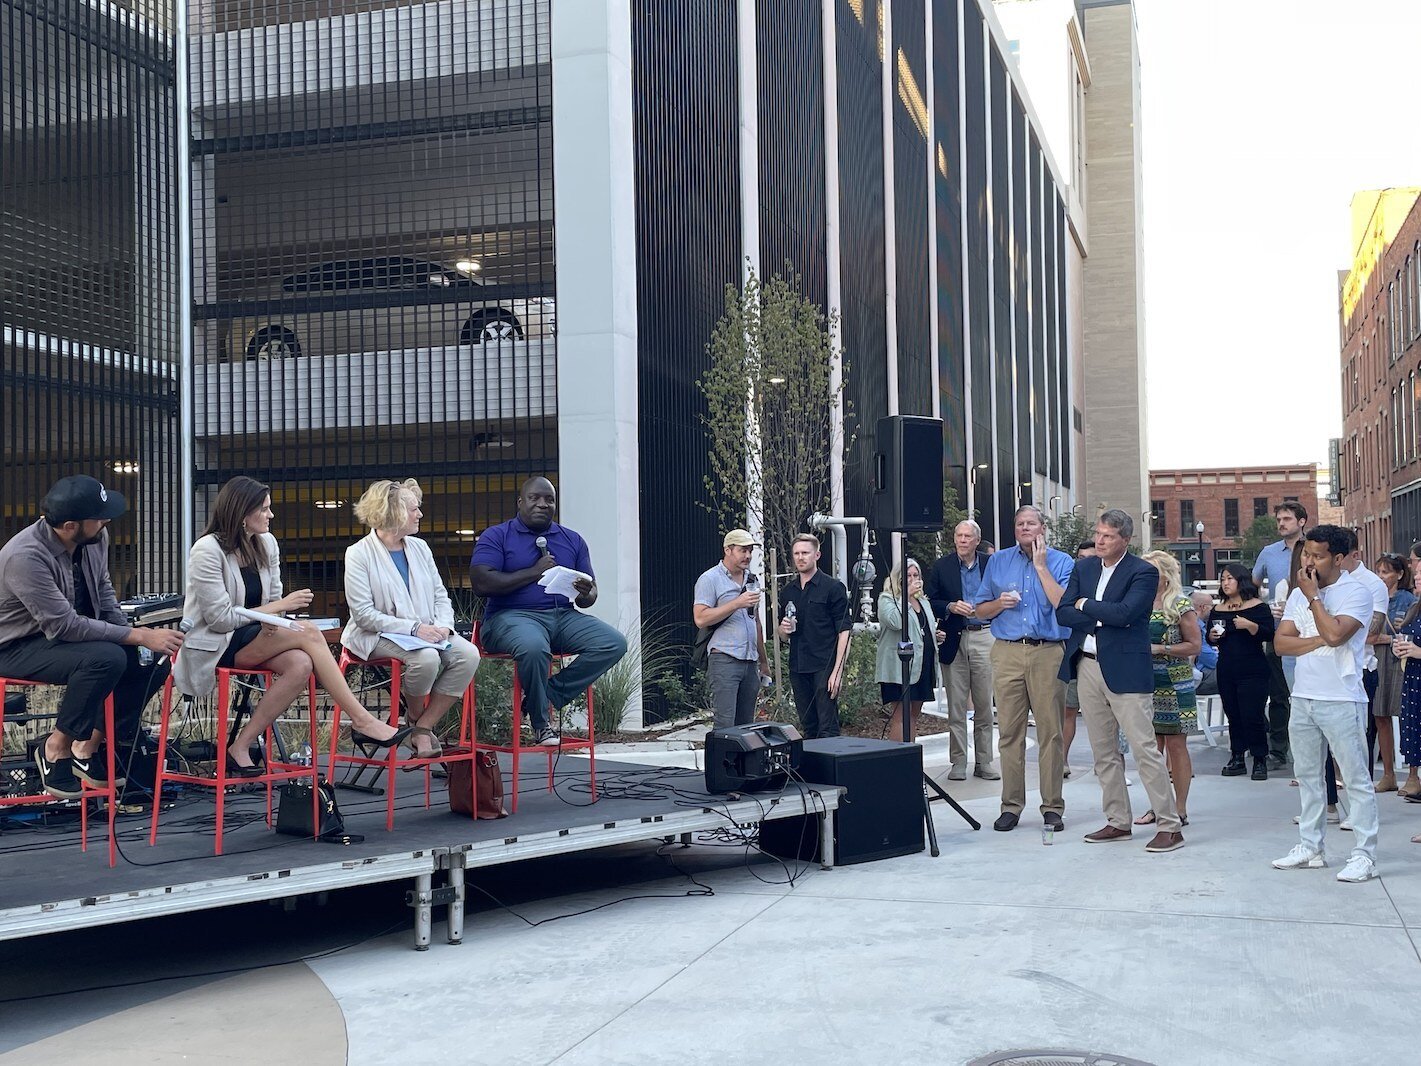 About 80 to 90 people turned out to learn about plans for the new Haymarket Plaza and placemaking in downtown Kalamazoo. Former mayor Bobby Hopewell was among those speaking Thursday.